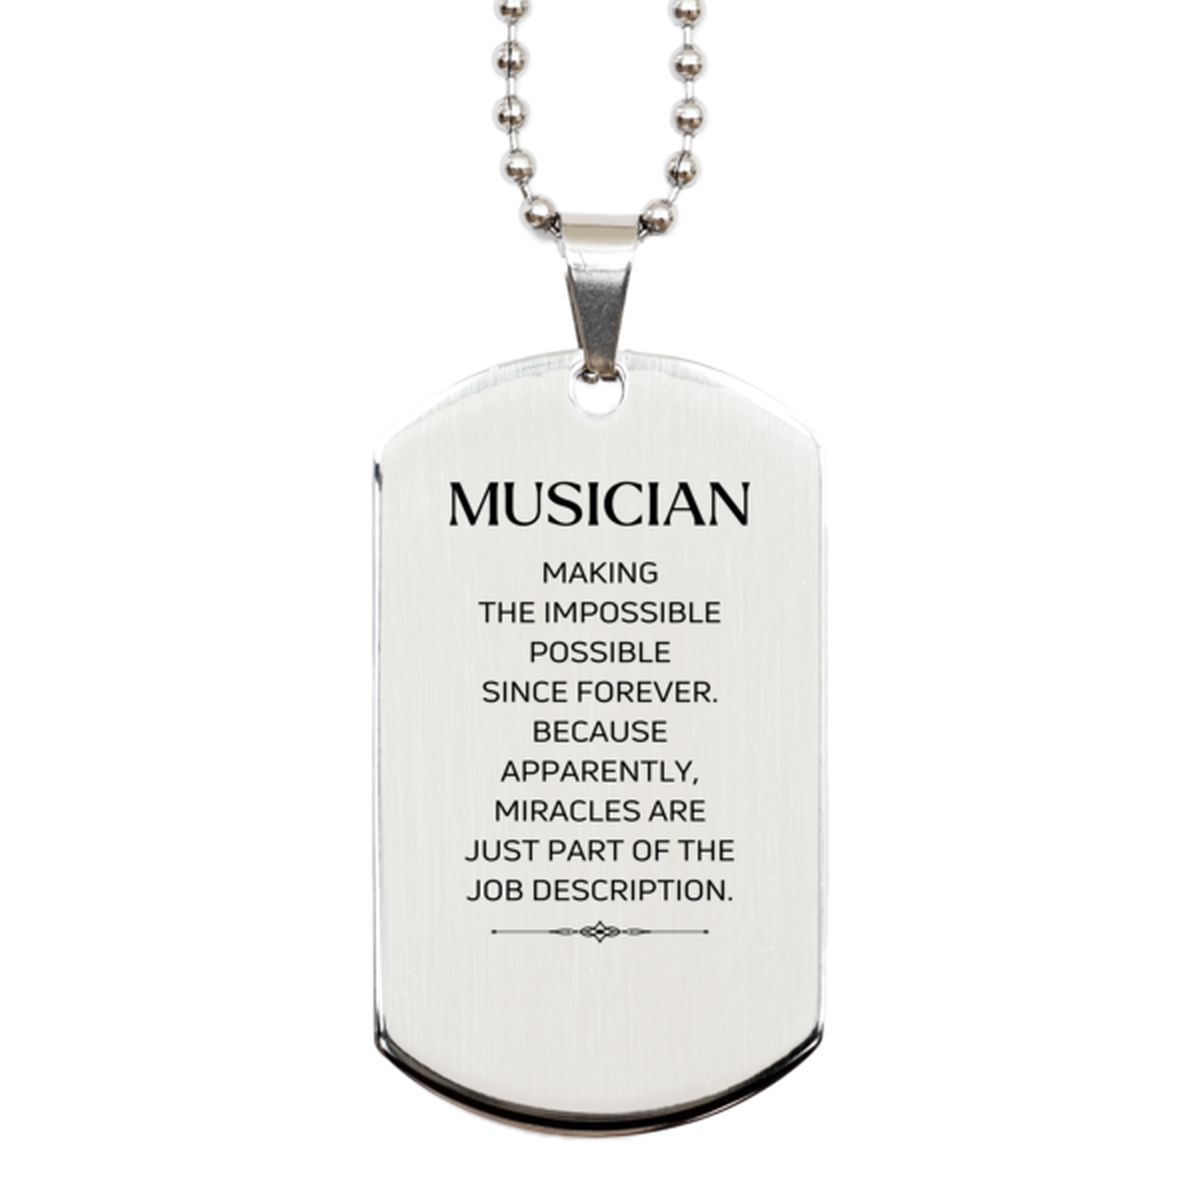 Funny Musician Gifts, Miracles are just part of the job description, Inspirational Birthday Silver Dog Tag For Musician, Men, Women, Coworkers, Friends, Boss